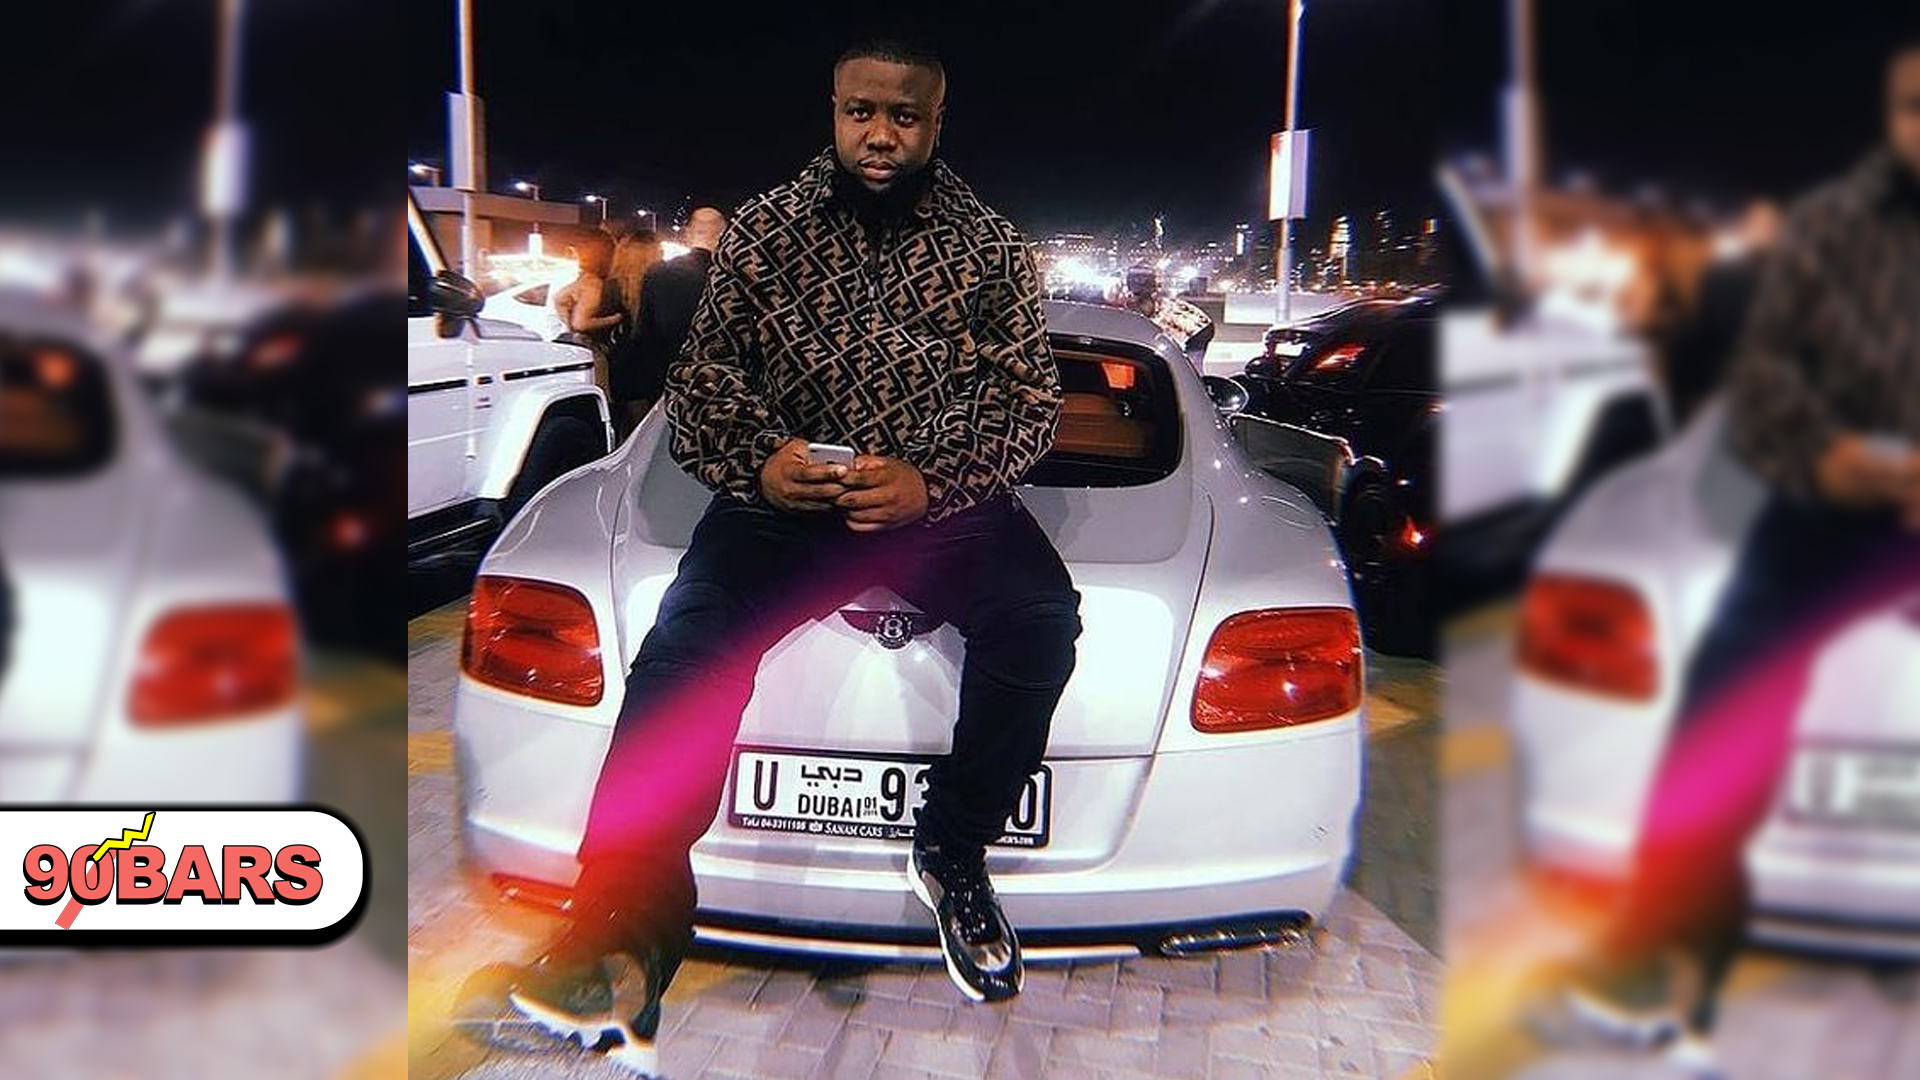 Hushpuppi ally and Nigerian Instagram millionaire Mr. Woodberry admits to fraud and agrees to pay $8 million